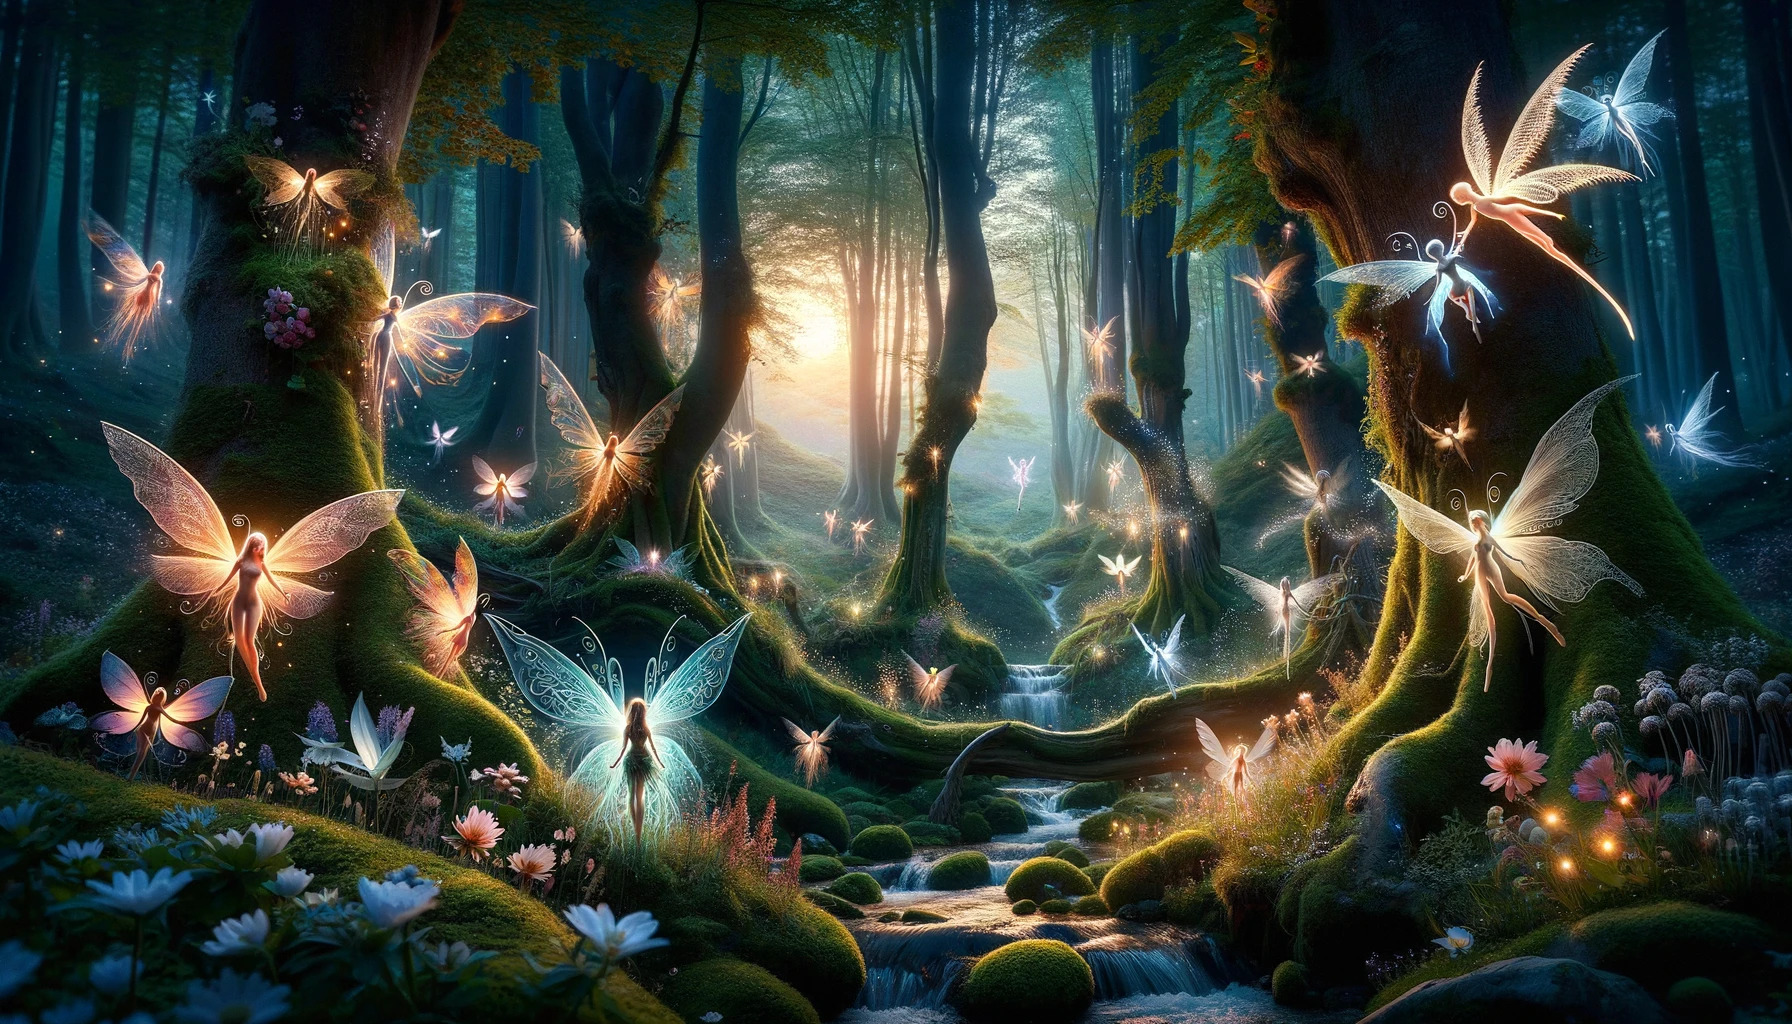 a cinematic image inspired by fairy names, capturing a mystical forest at twilight where whimsical fairies glow with ethereal light. Let your imagination soar through this magical realm.